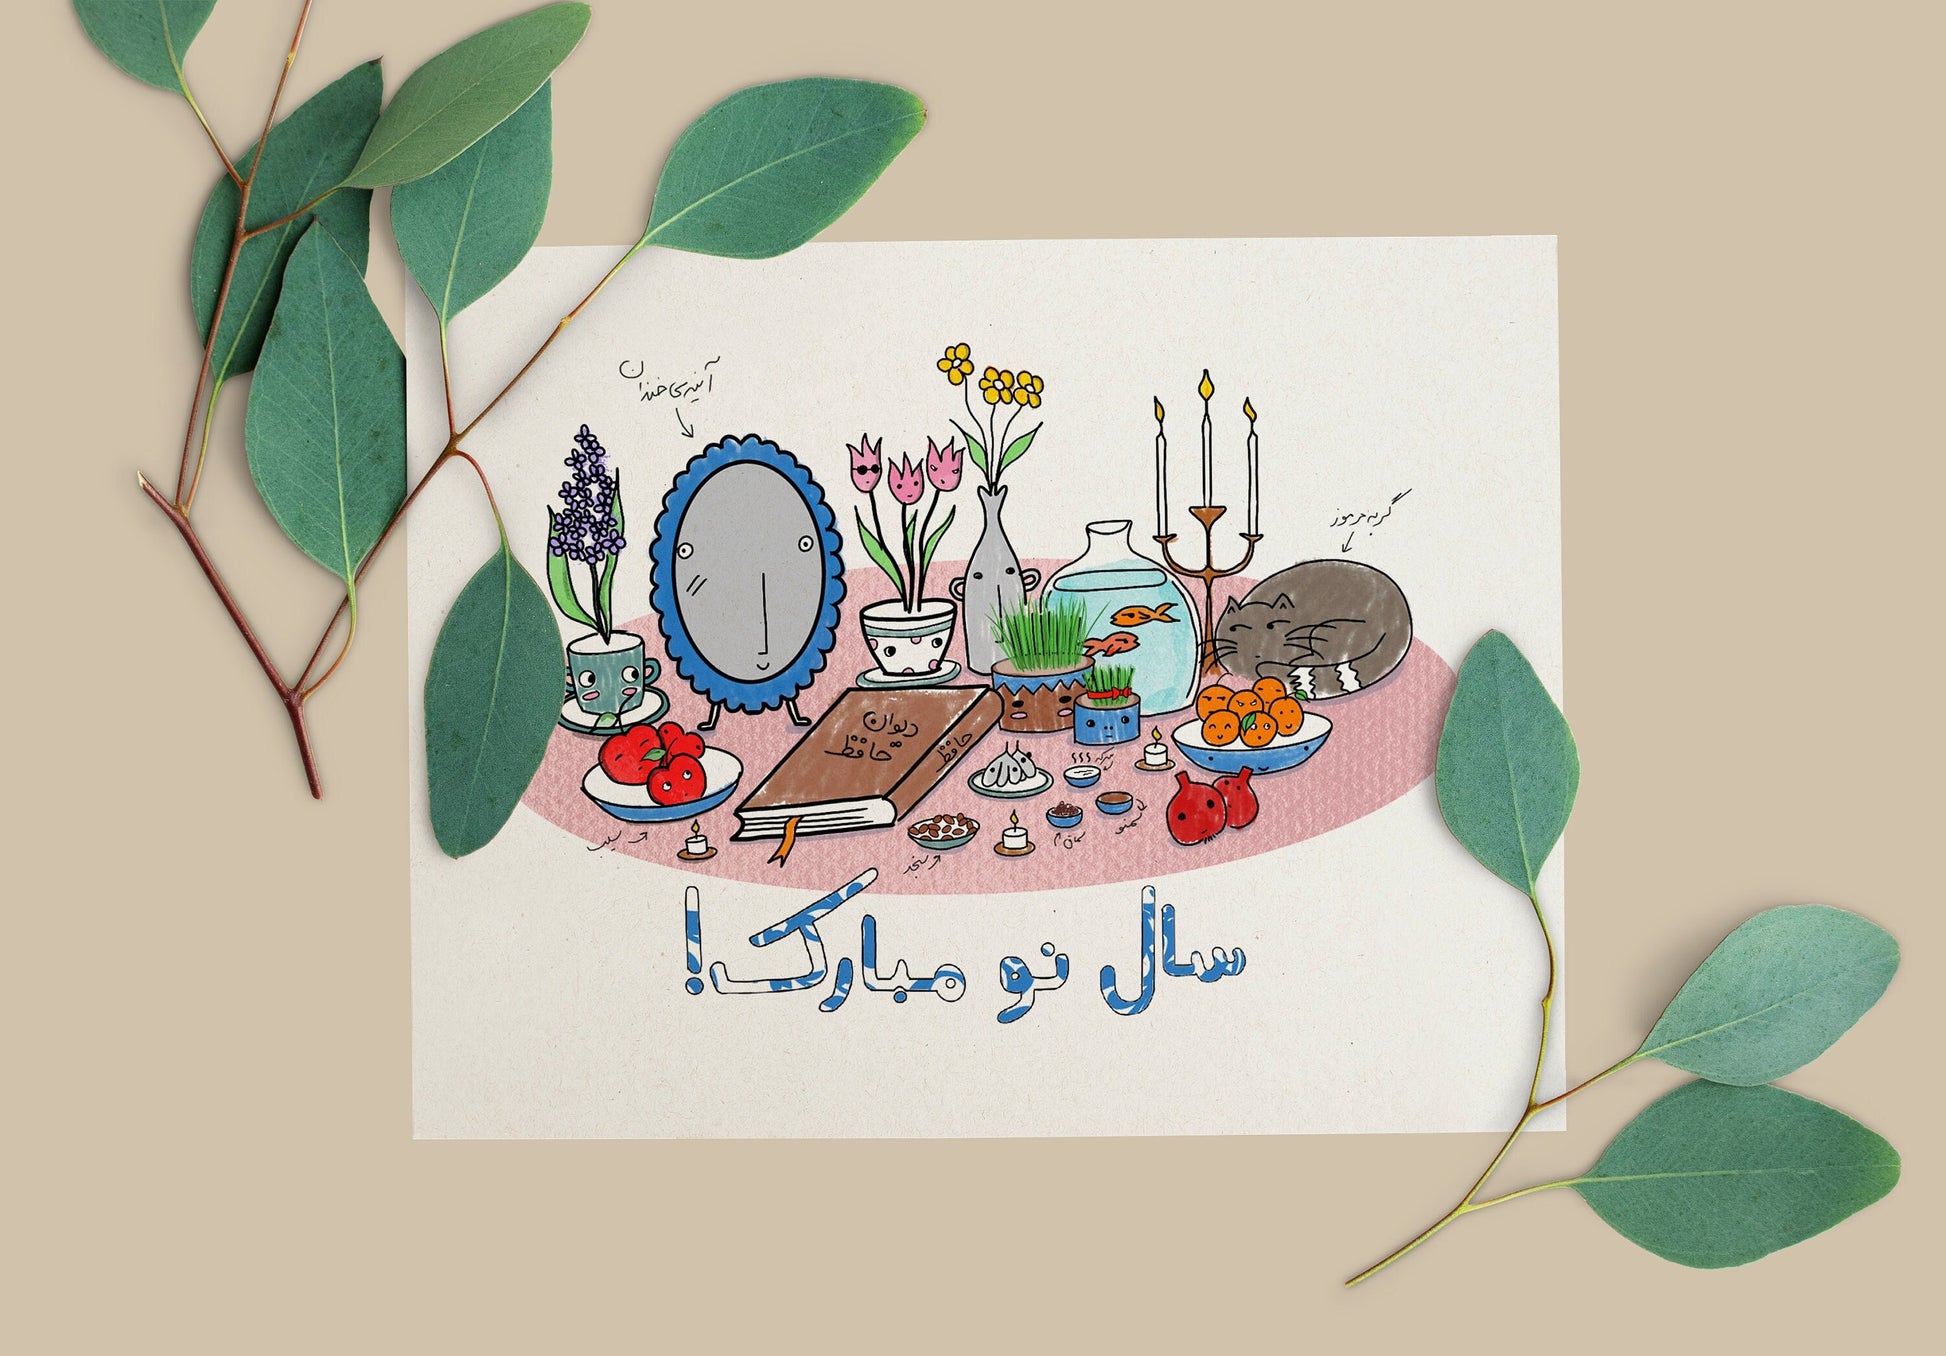 Norooz Card, Persian New Year Sofre Haft Seen, Eid Mobarak, Funny Nowrooz Card, Happy Spring for Family, Friend Card, Nowruz Gift for Mom